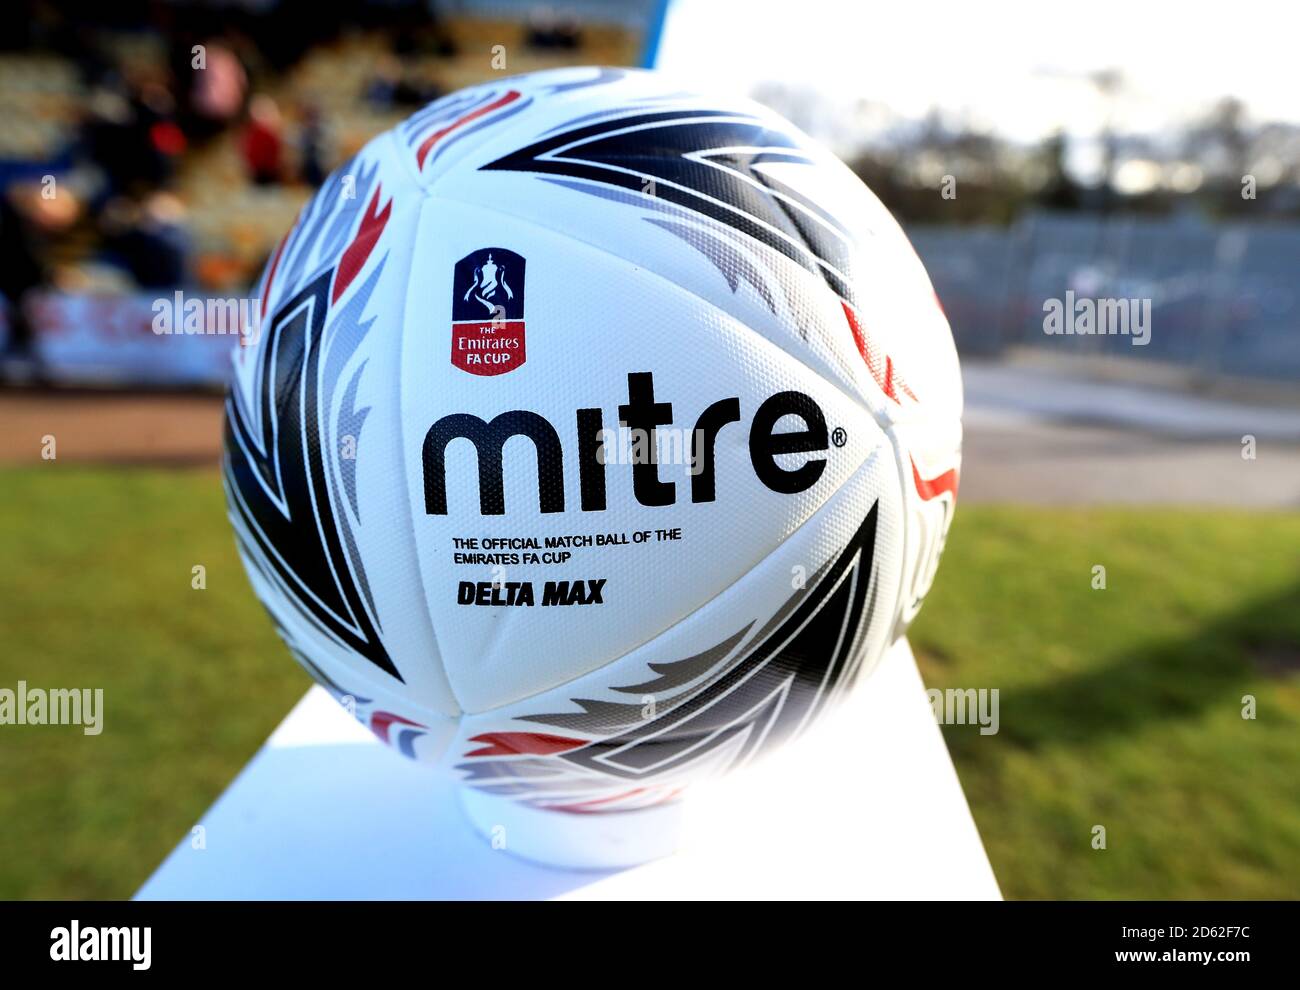 Official Mitre match ball of the Emirates FA Cup Stock Photo - Alamy